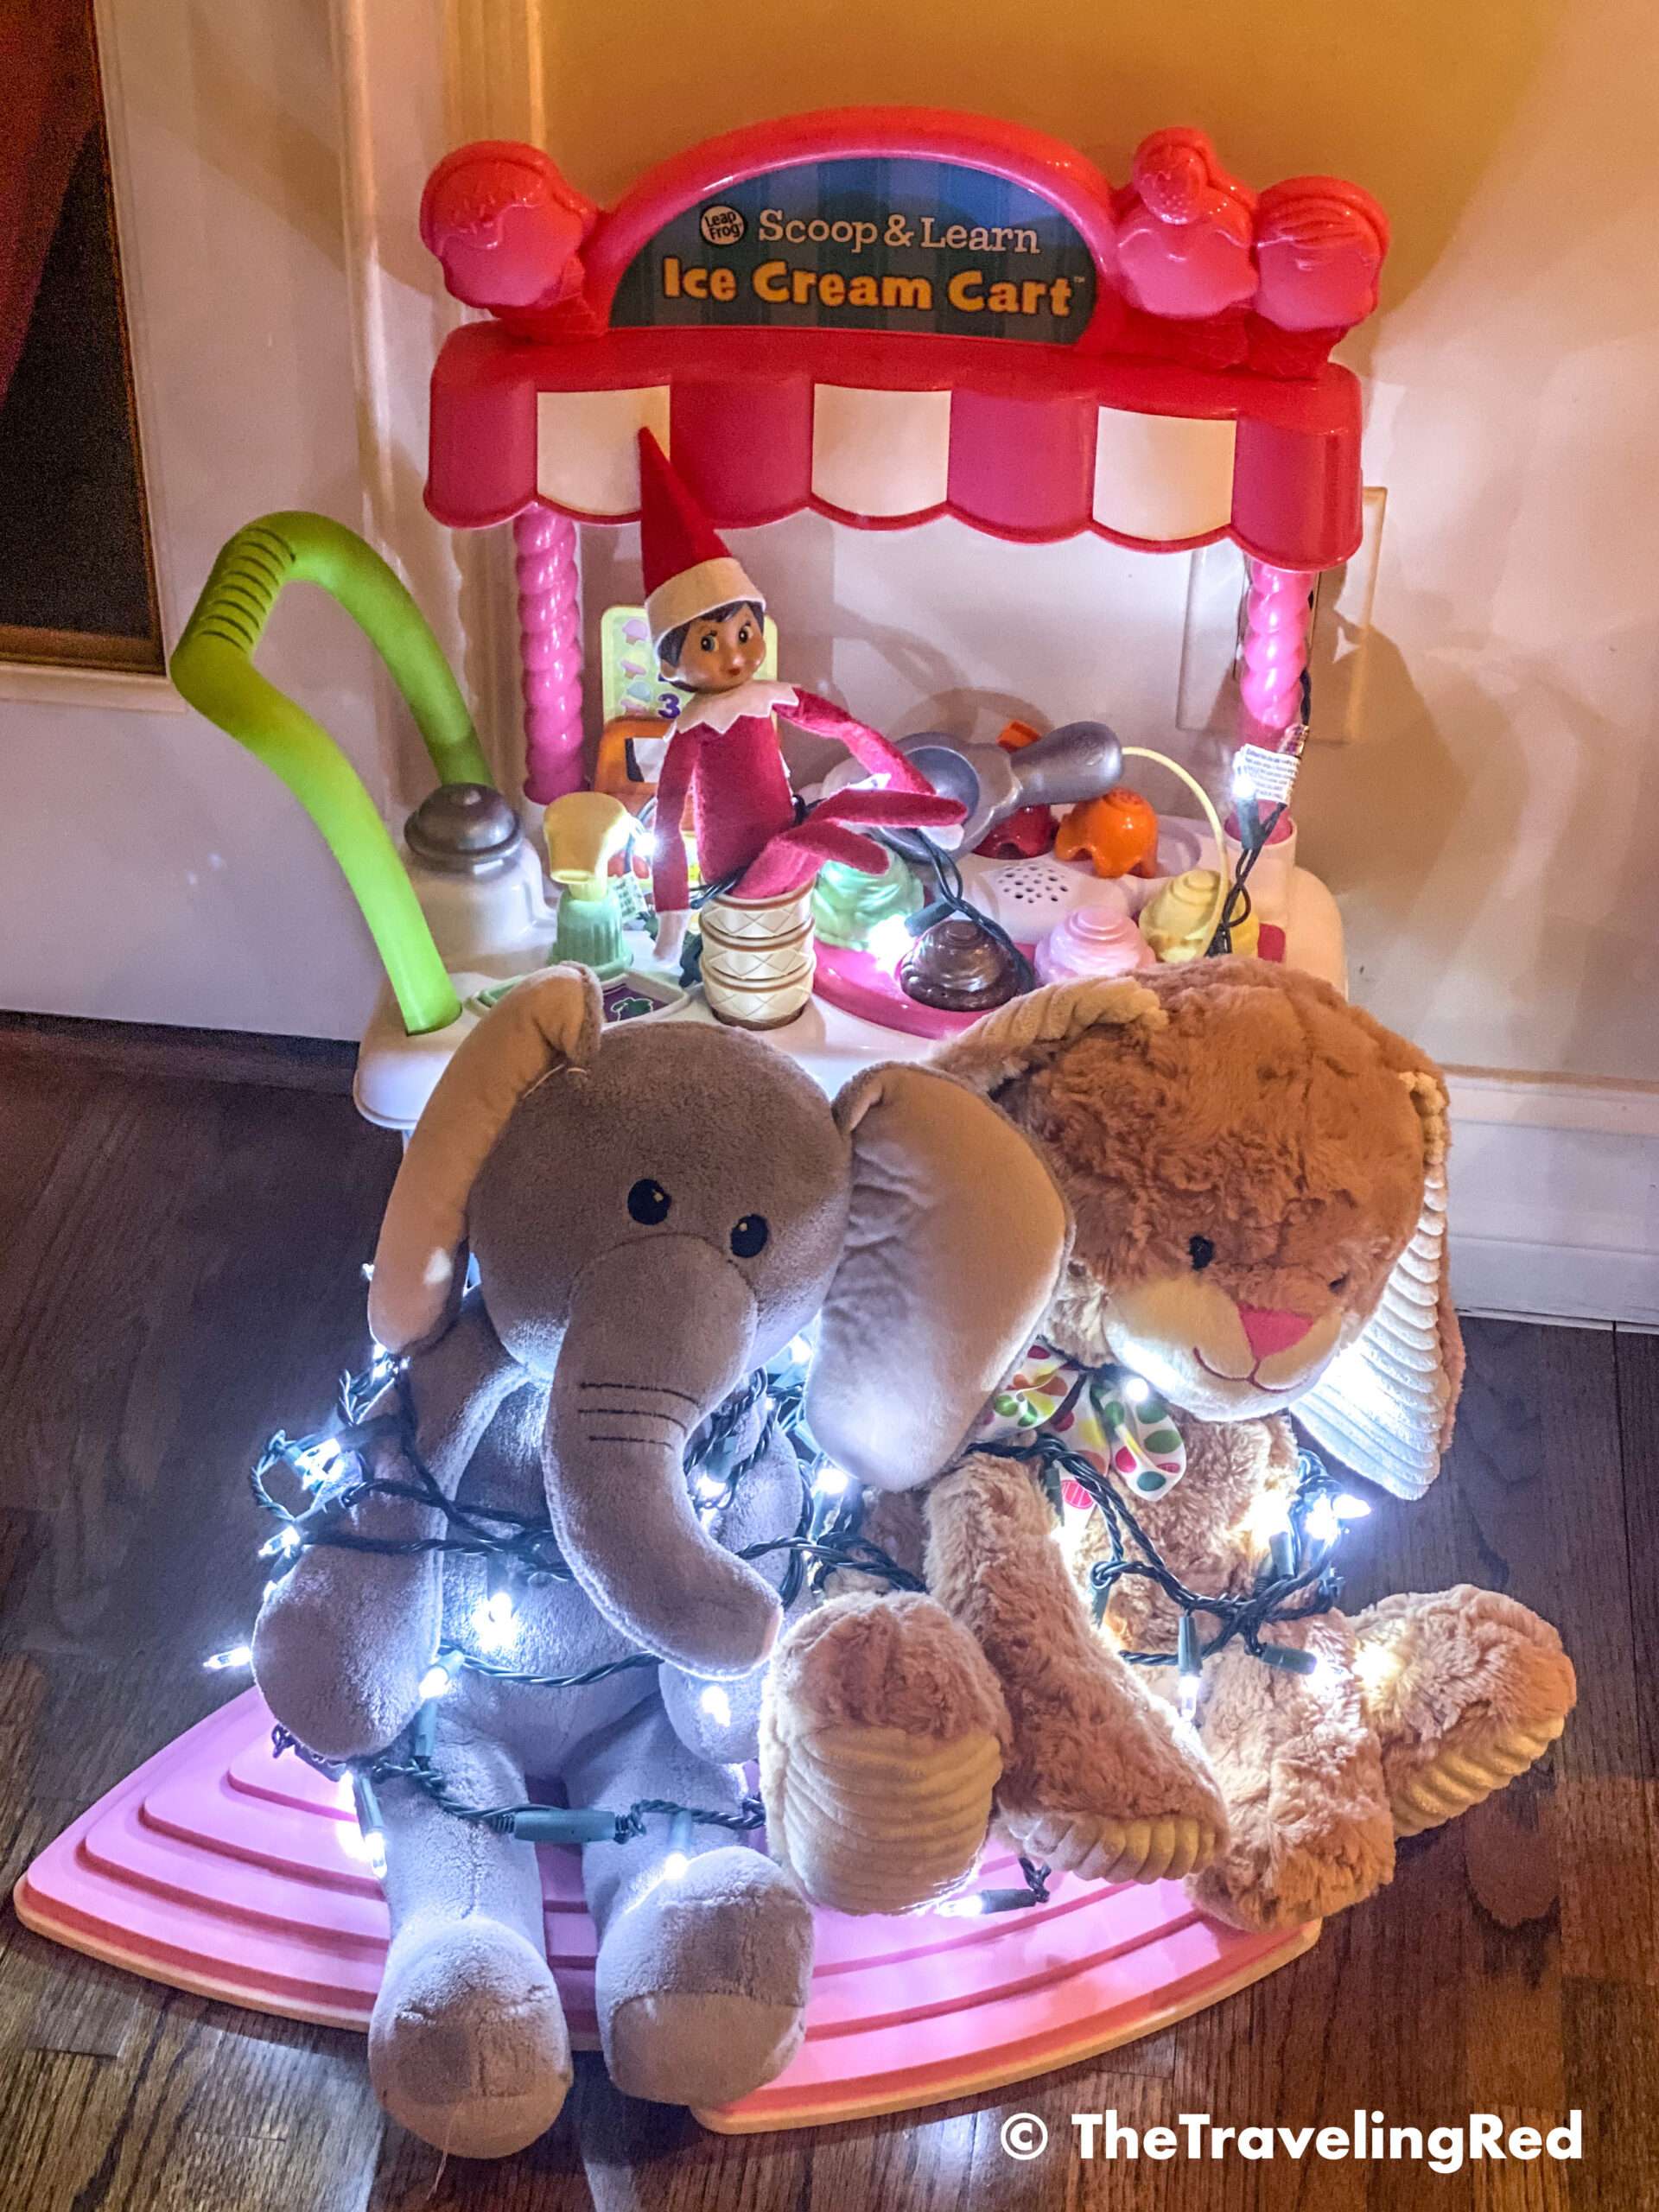 Naughty Elf on the shelf used a strand of christmas lights to tie up some of the stuffed animals. Fun and easy elf on the shelf ideas for a naughty elf that are quick and easy using things you have at home.